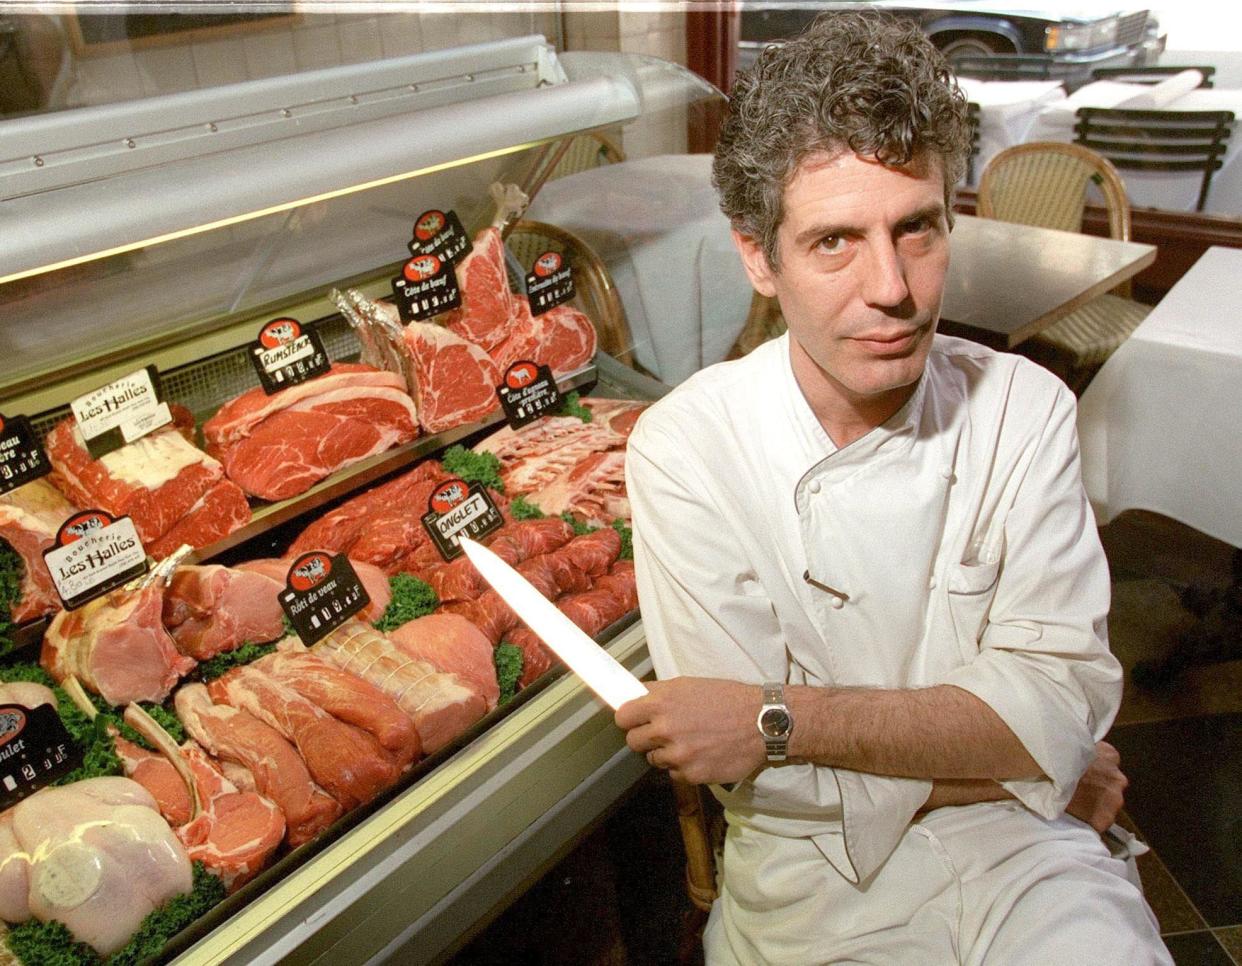 Bourdain, a 1978 graduate of the Culinary Institute of America, was made the executive chef of French restaurant Brasserie Les Halles in Manhattan in 1998, where he stayed for some time.